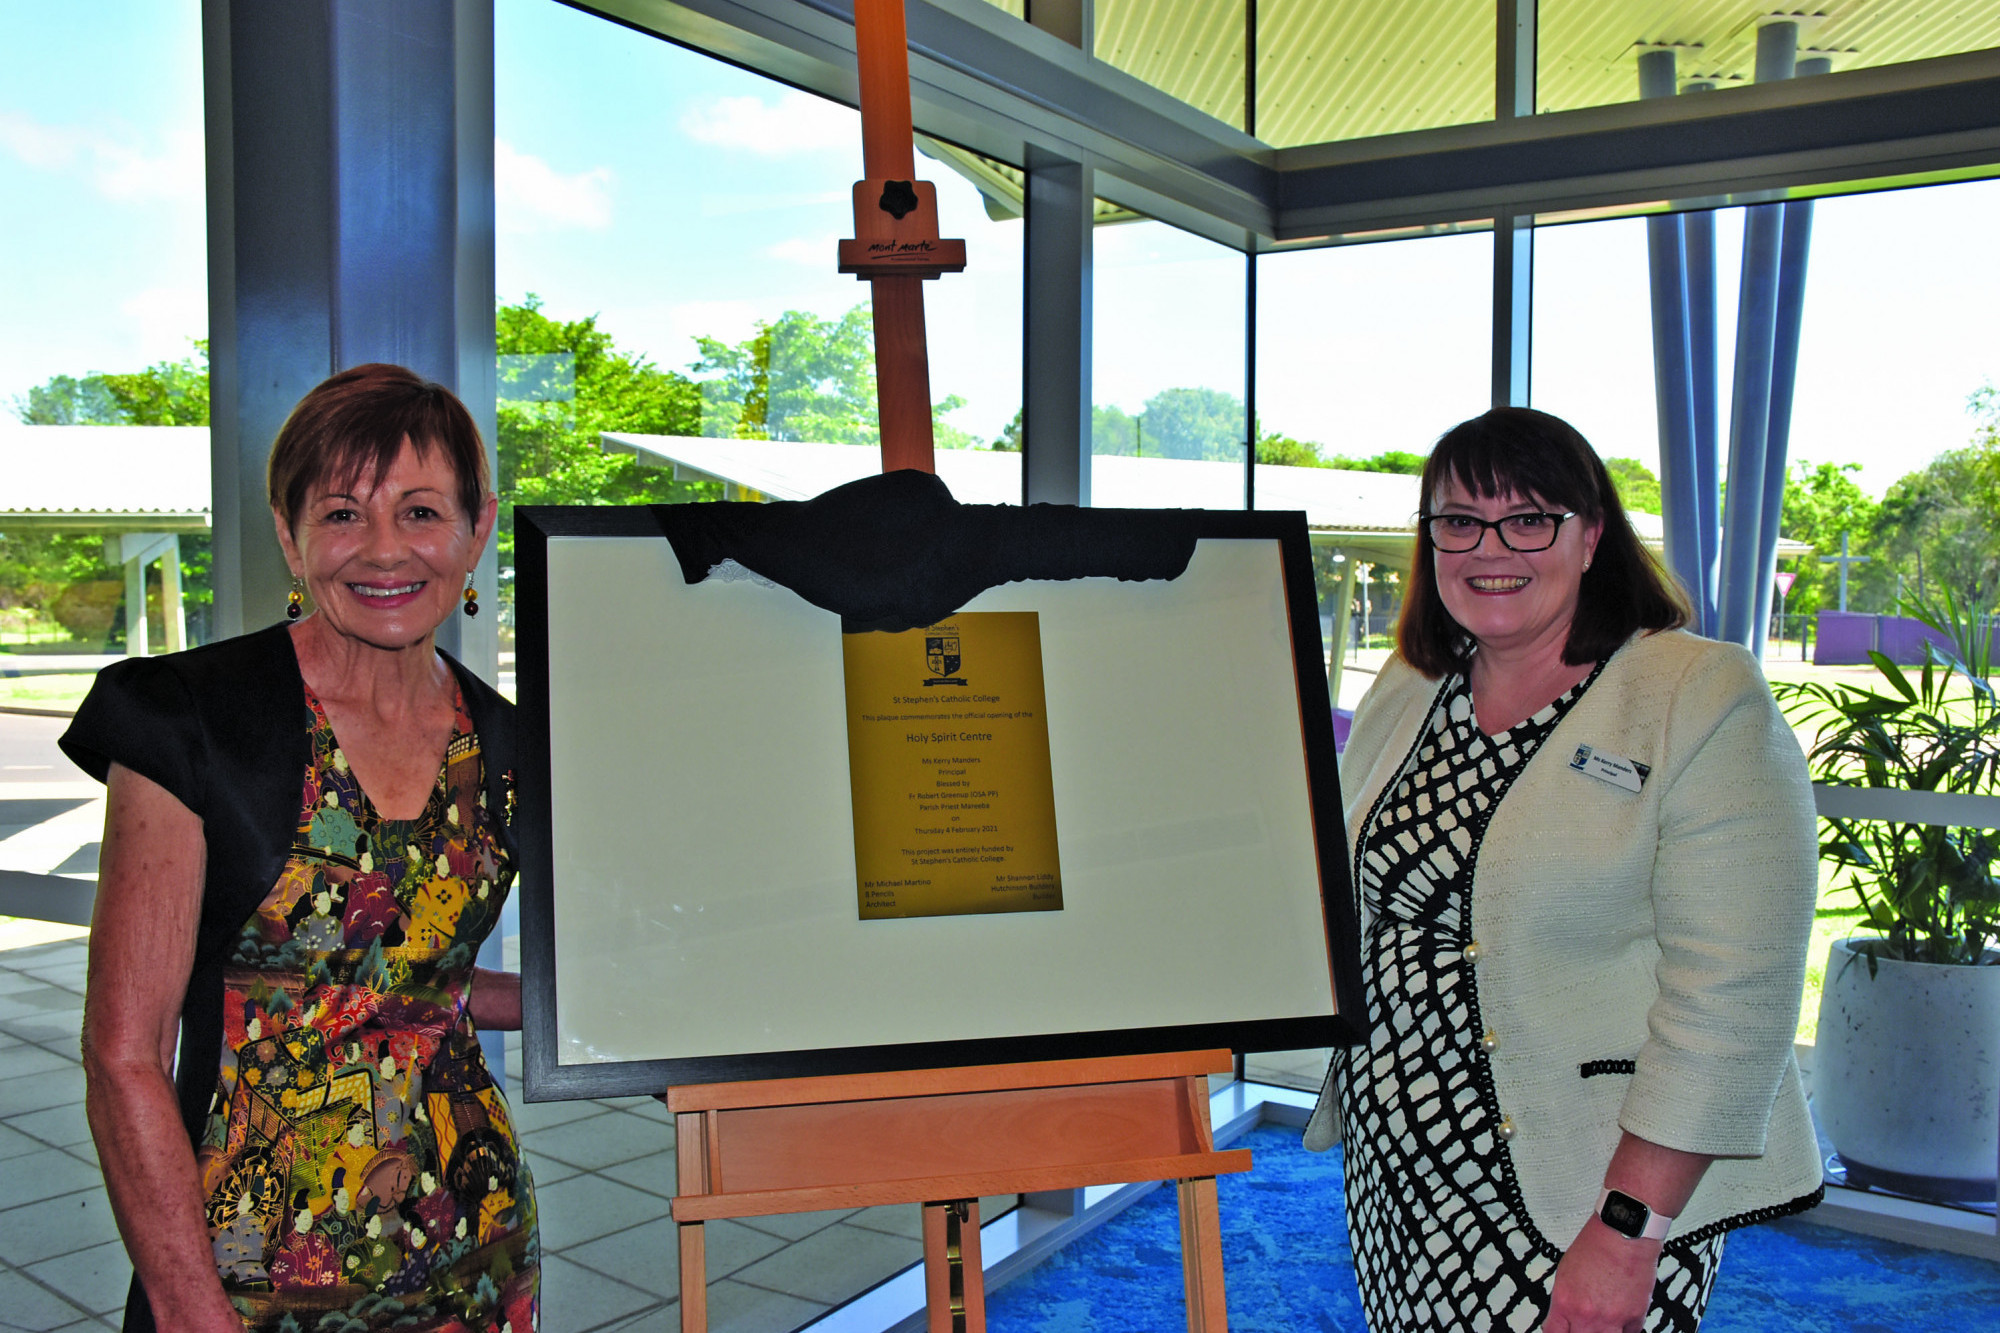 Past St Stephen’s Catholic College Principal Ida Pinese and current Principal Kerry Manders with the commemorative plaque of The Holy Spirit Centre that was officially opened last Thursday.